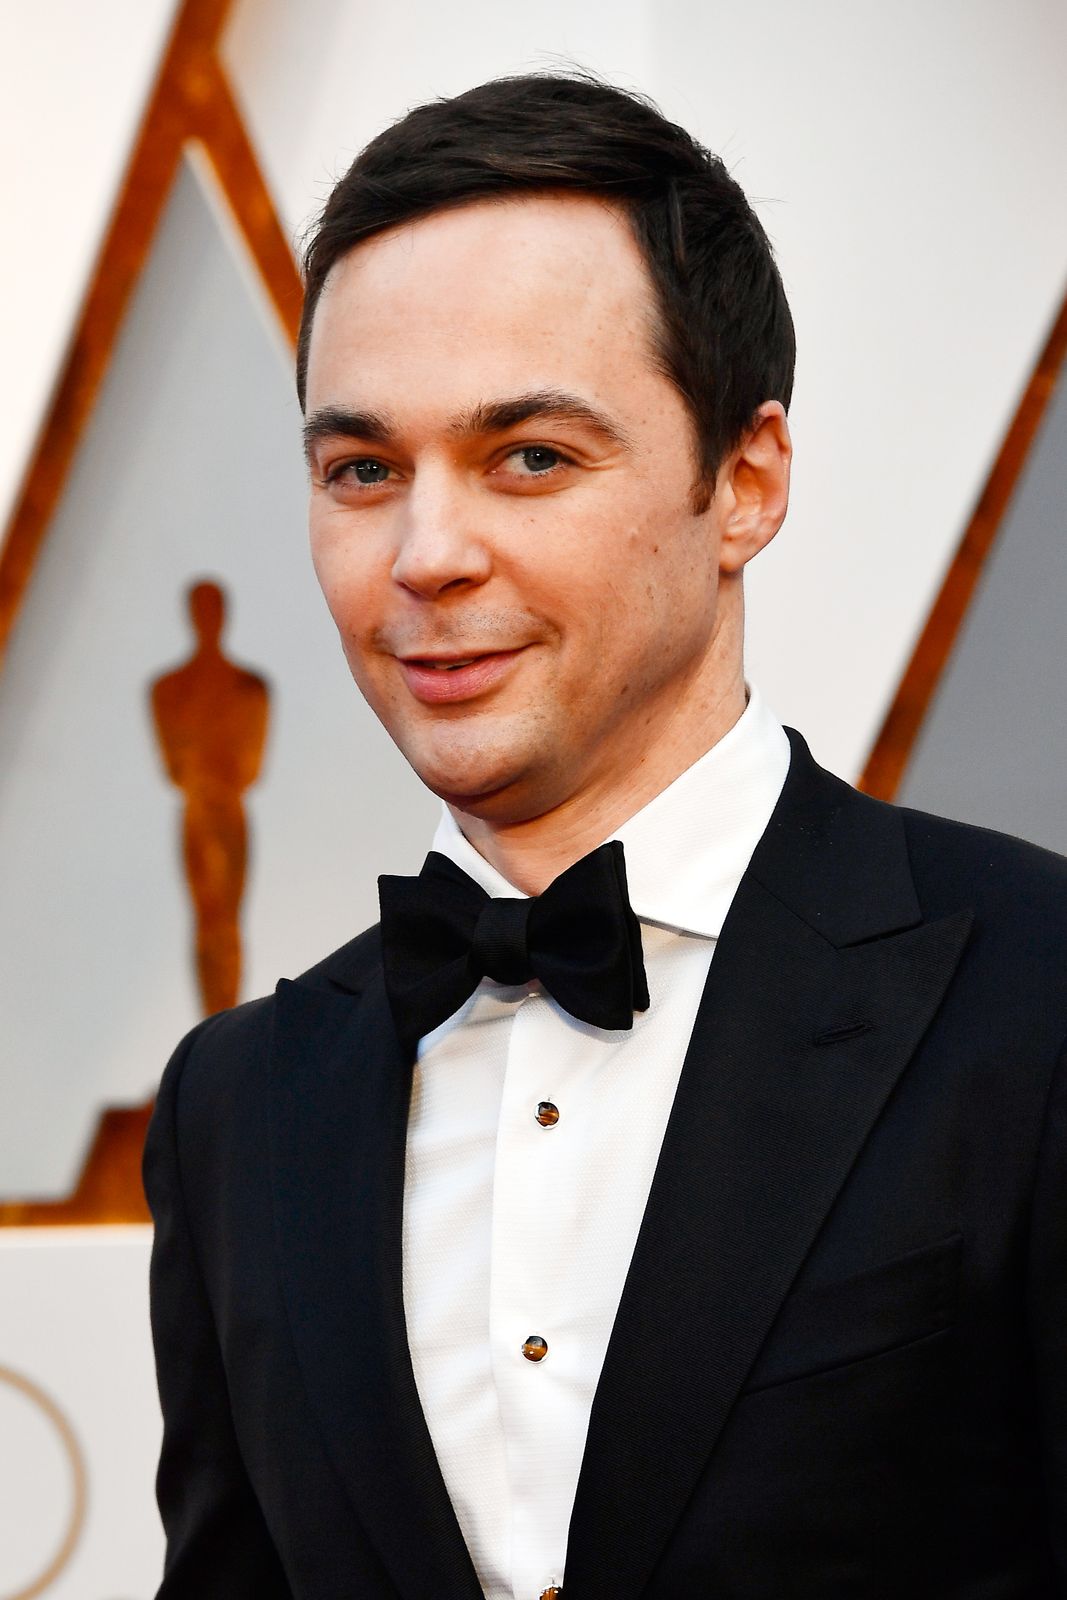 Actor Jim Parsons at the 89th Annual Academy Awards at Hollywood & Highland Center on February 26, 2017 in Hollywood, California | Photo: Getty Images